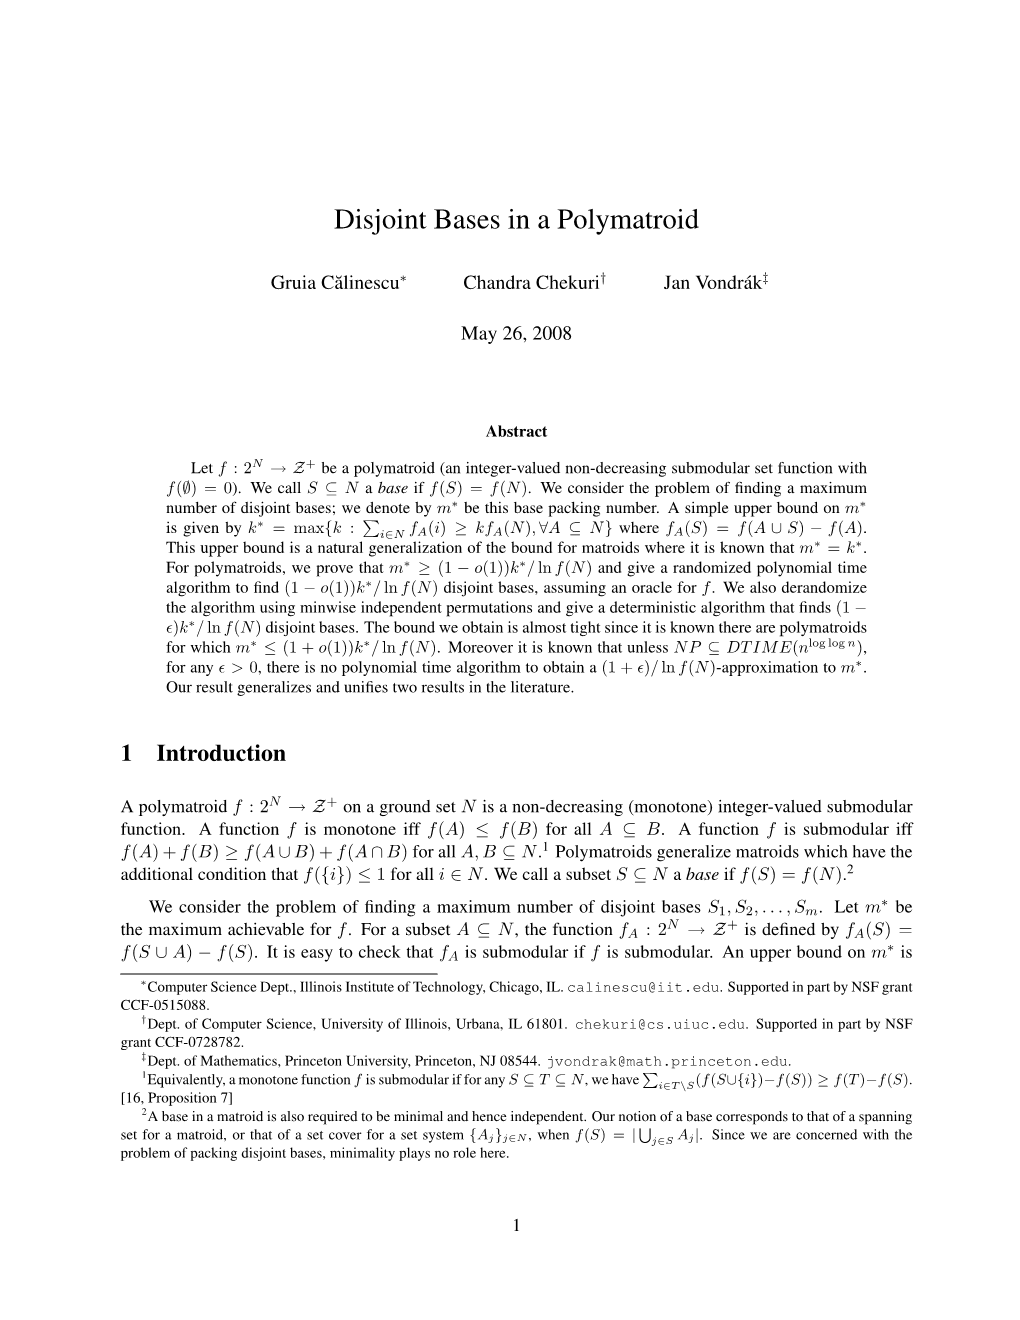 Disjoint Bases in a Polymatroid